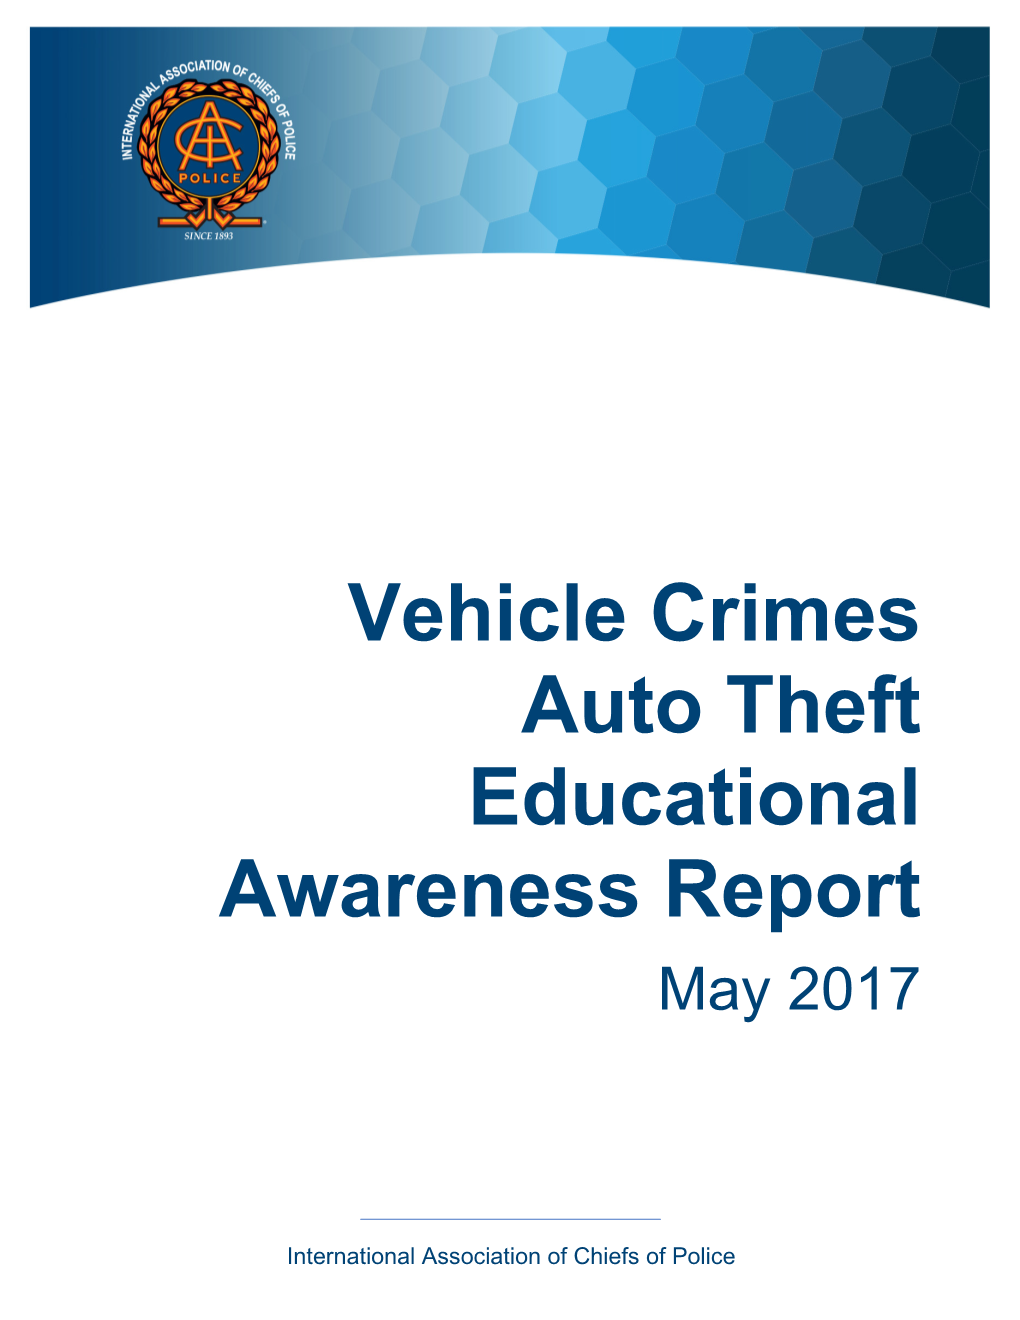 Vehicle Crimes Auto Theft Educational Awareness Report May 2017